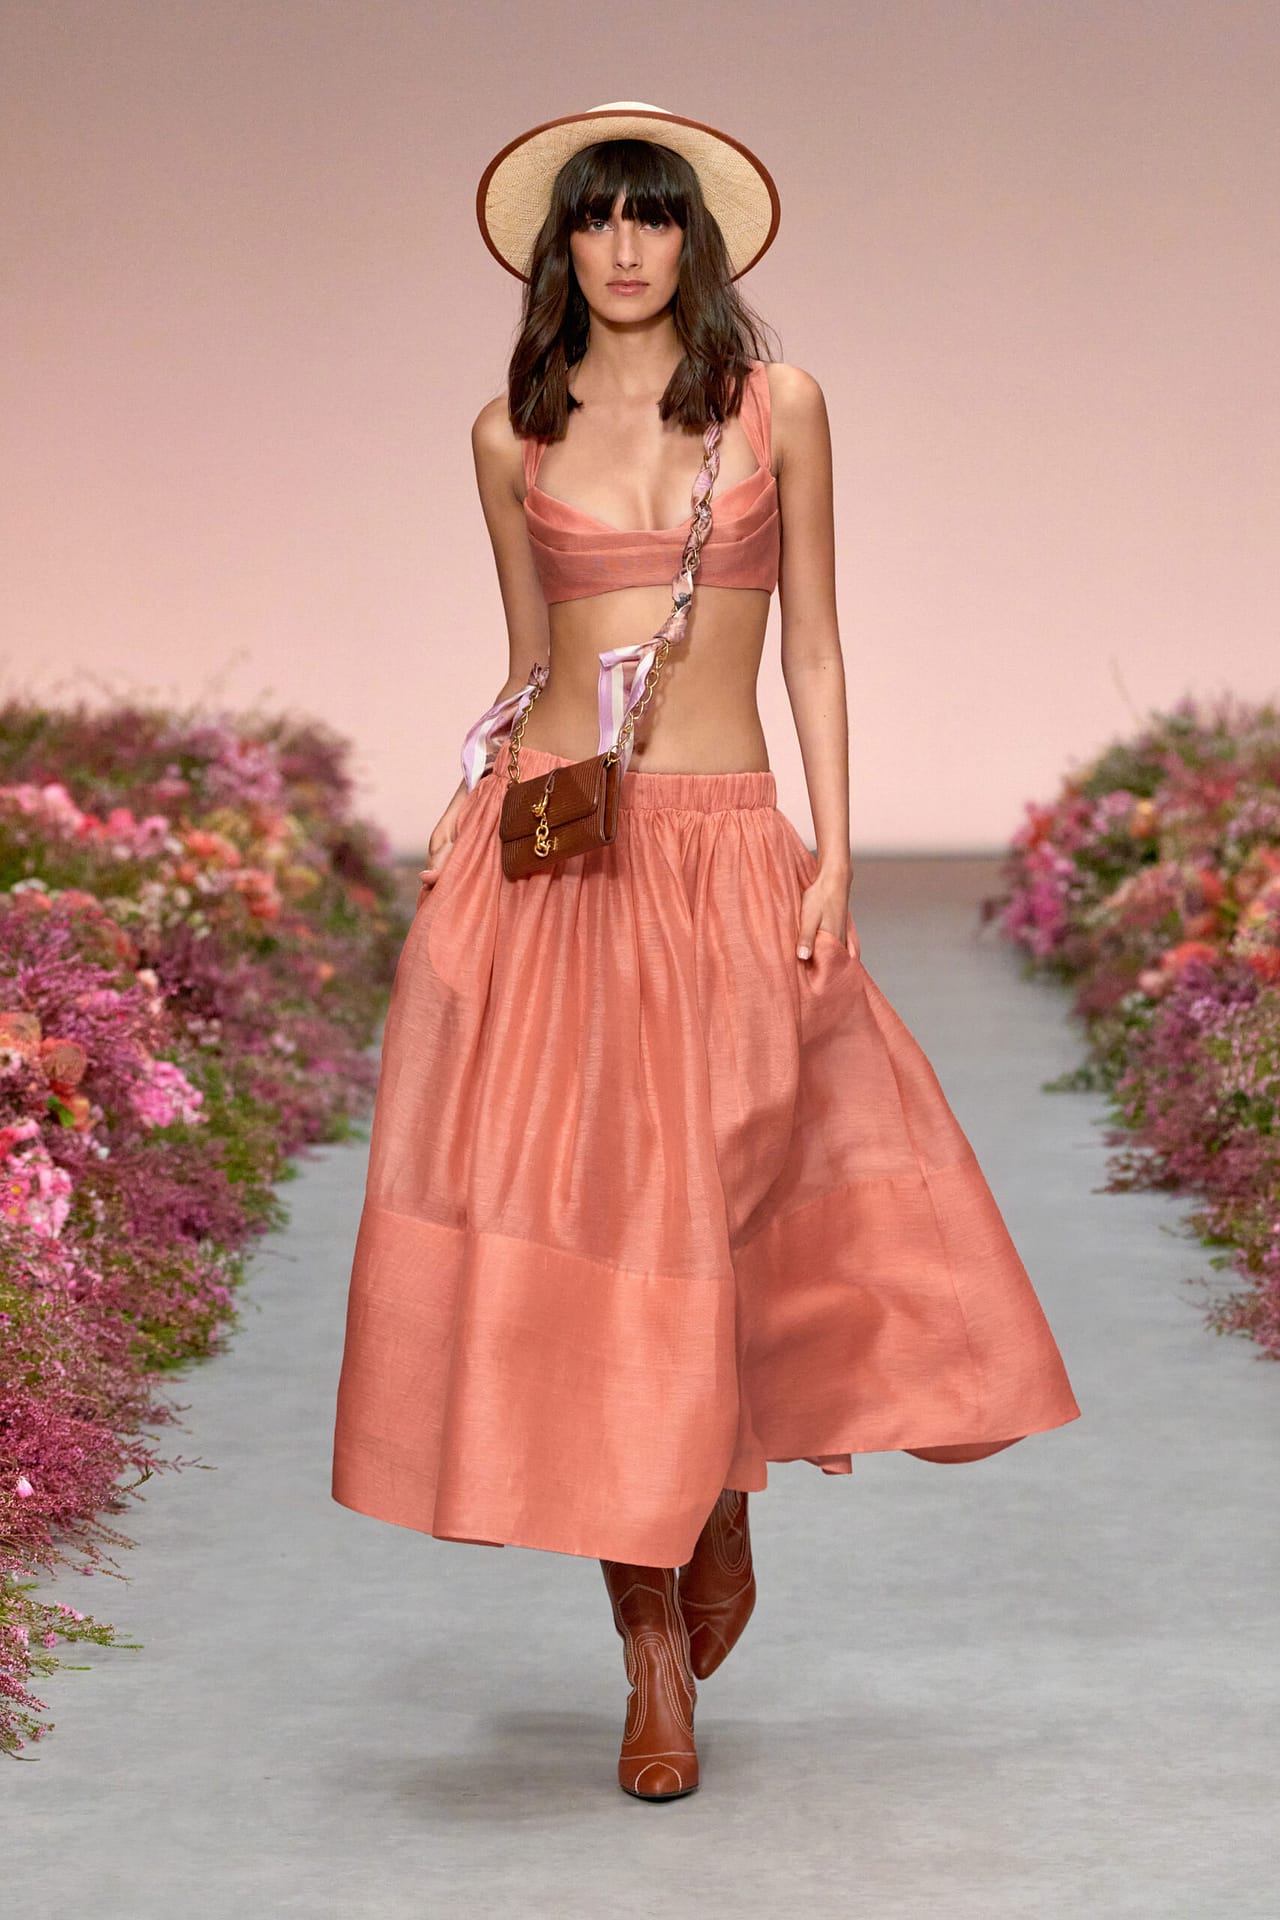 Rosa corallo - Nicky Zimmermann Ready-to-Wear Spring 2020